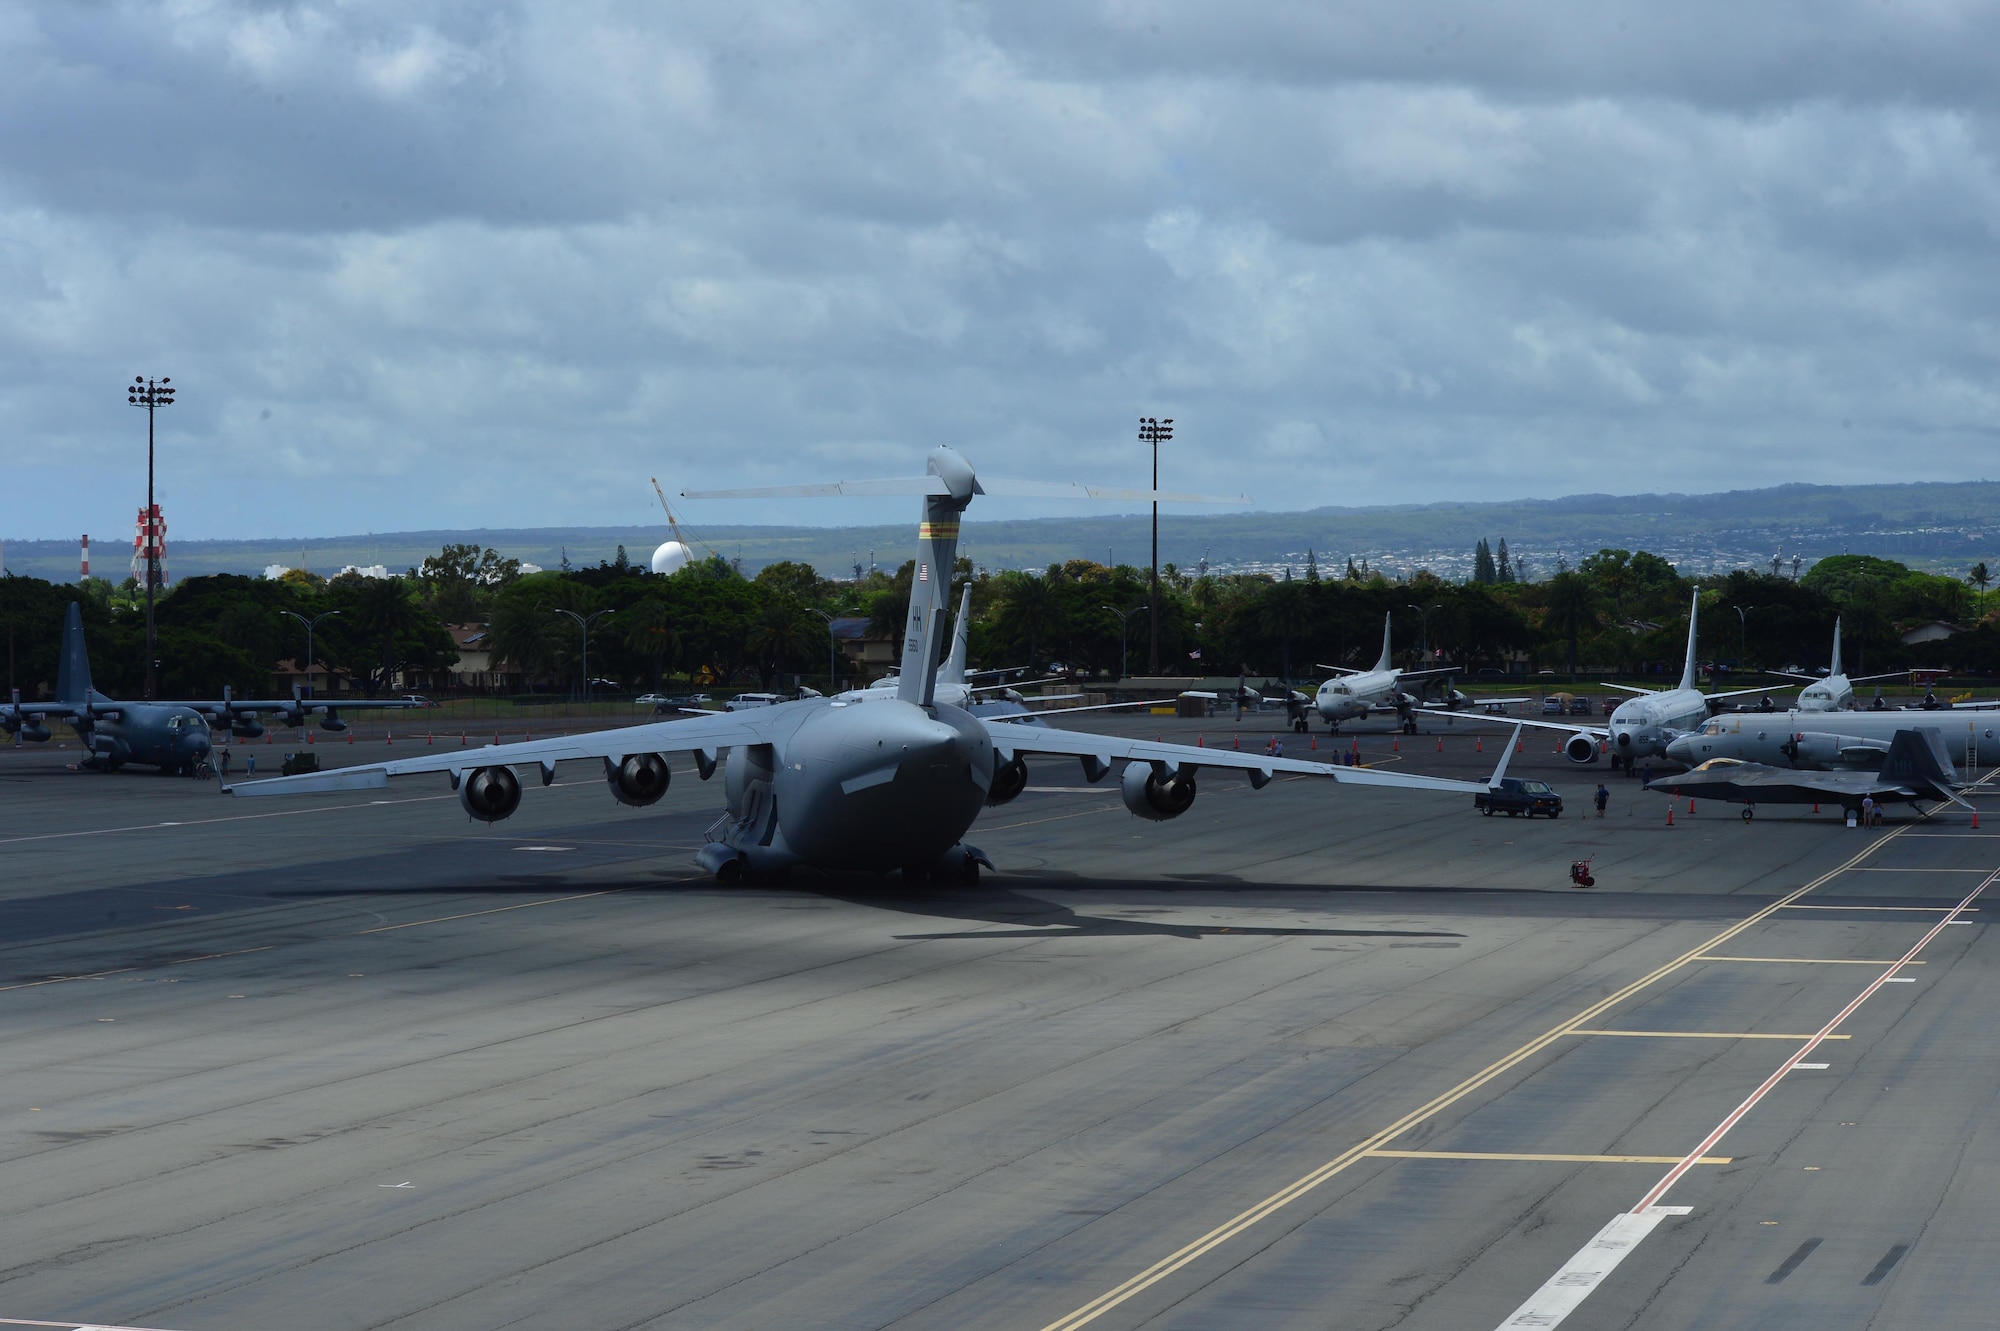 Aircraft from the U.S. Army, U.S. Navy, U.S. Air Force along with aircraft from Royal Canadian Air Force and The Japan Maritime Self-Defense Force where on display during the Rim of the Pacific 2016 open house on Joint Base Pearl Harbor-Hickam, July 09, 2016. Twenty-six nations, 49 ships, six submarines, about 200 aircraft, and 25,000 personnel are participating in Rim of the Pacific 2016 from June 29 to Aug. 4 in and around the Hawaiian Islands and Southern California. The world’s largest international maritime exercise, RIMPAC provides a unique training opportunity while fostering and sustaining cooperative relationships between participants critical to ensuring the safety of sea lanes and security on the world’s oceans. RIMPAC 16 is the 25th exercise in the series that began in 1971. (U.S. Air Force photo by Tech. Sgt. Aaron Oelrich)